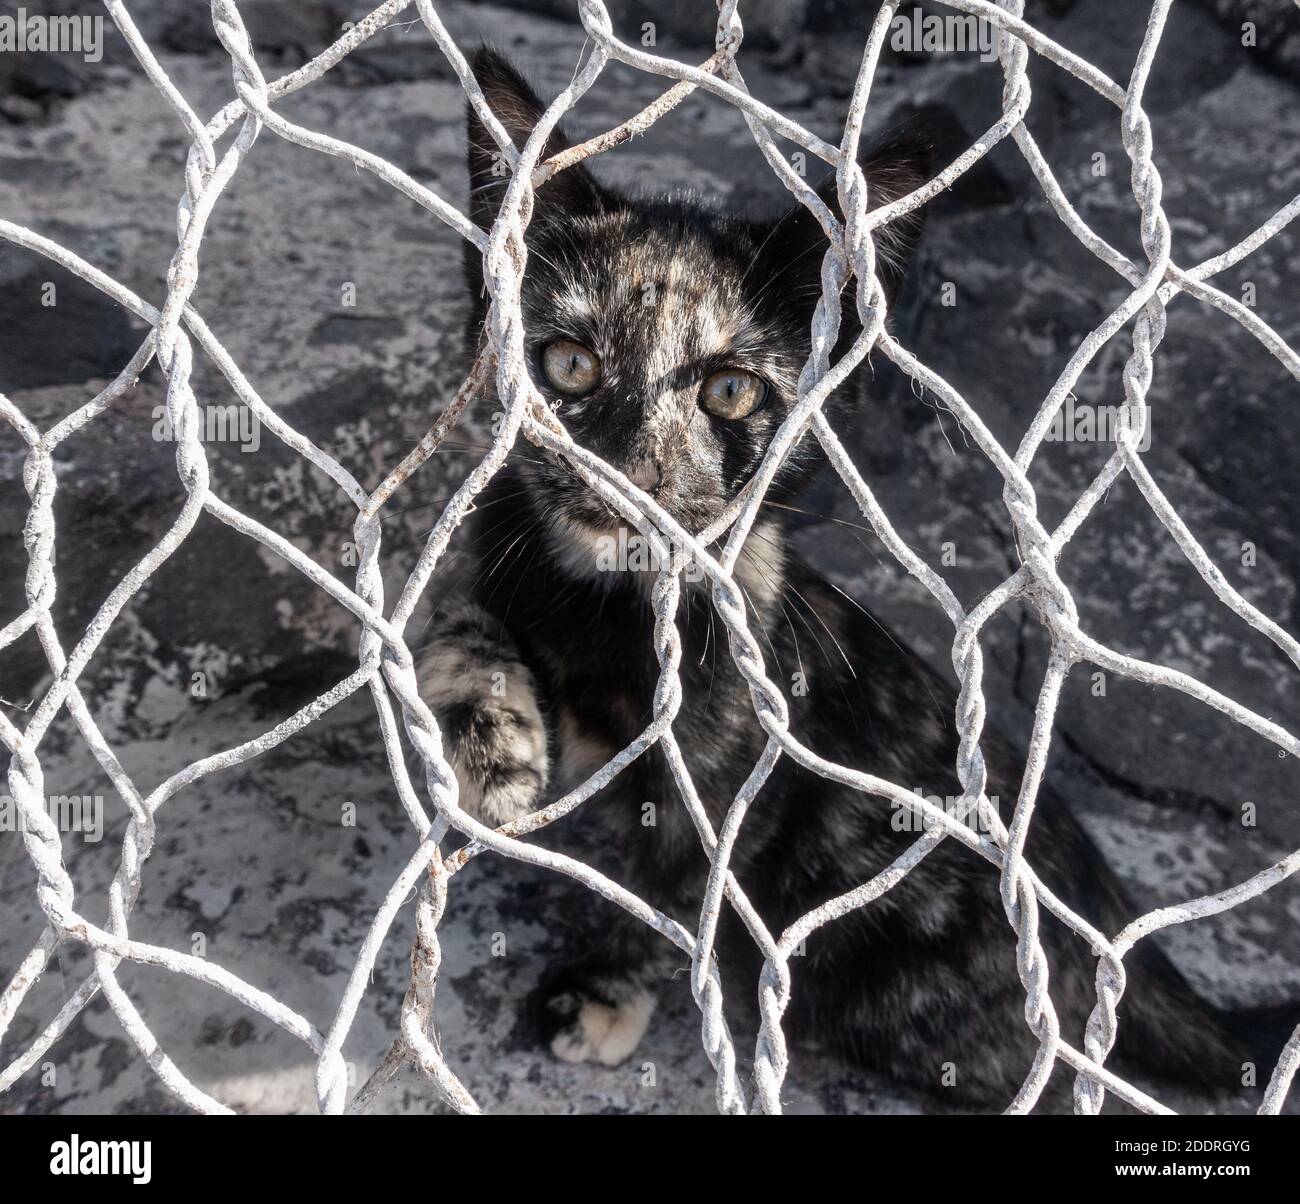 Feral cat/kitten behind wire fence. Stock Photo